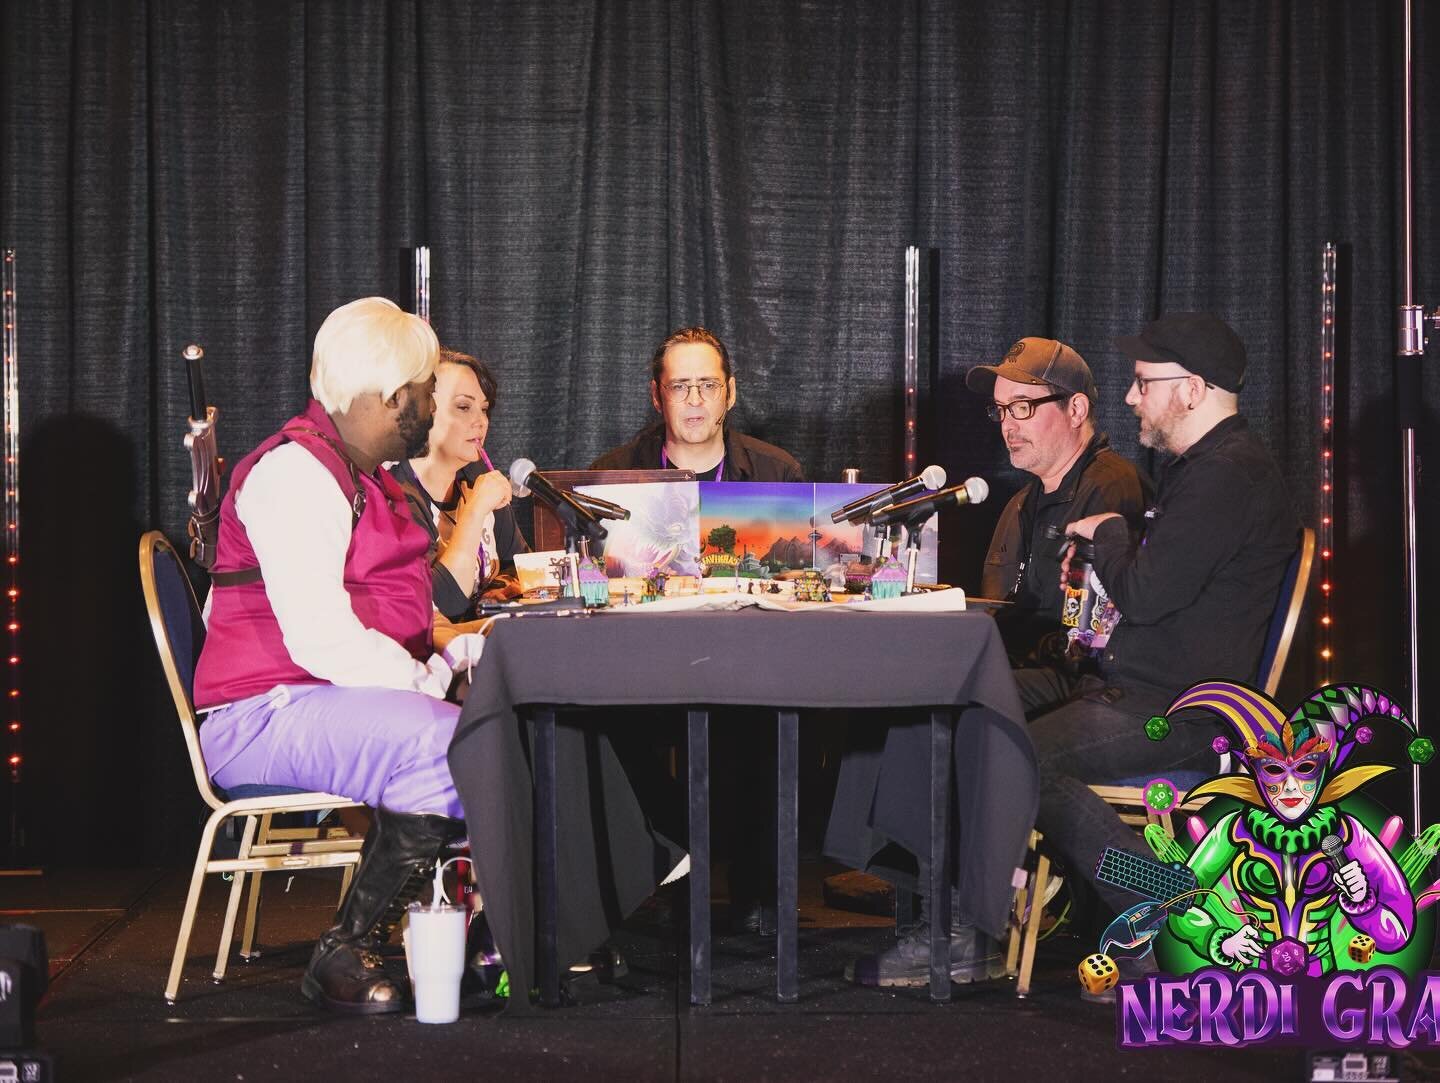 @mr.markmeer once again hosting a impromptu DnD game with @therealmikalmosley and the crew from @dadsgarageatl #nerdigras #nerdigras2024